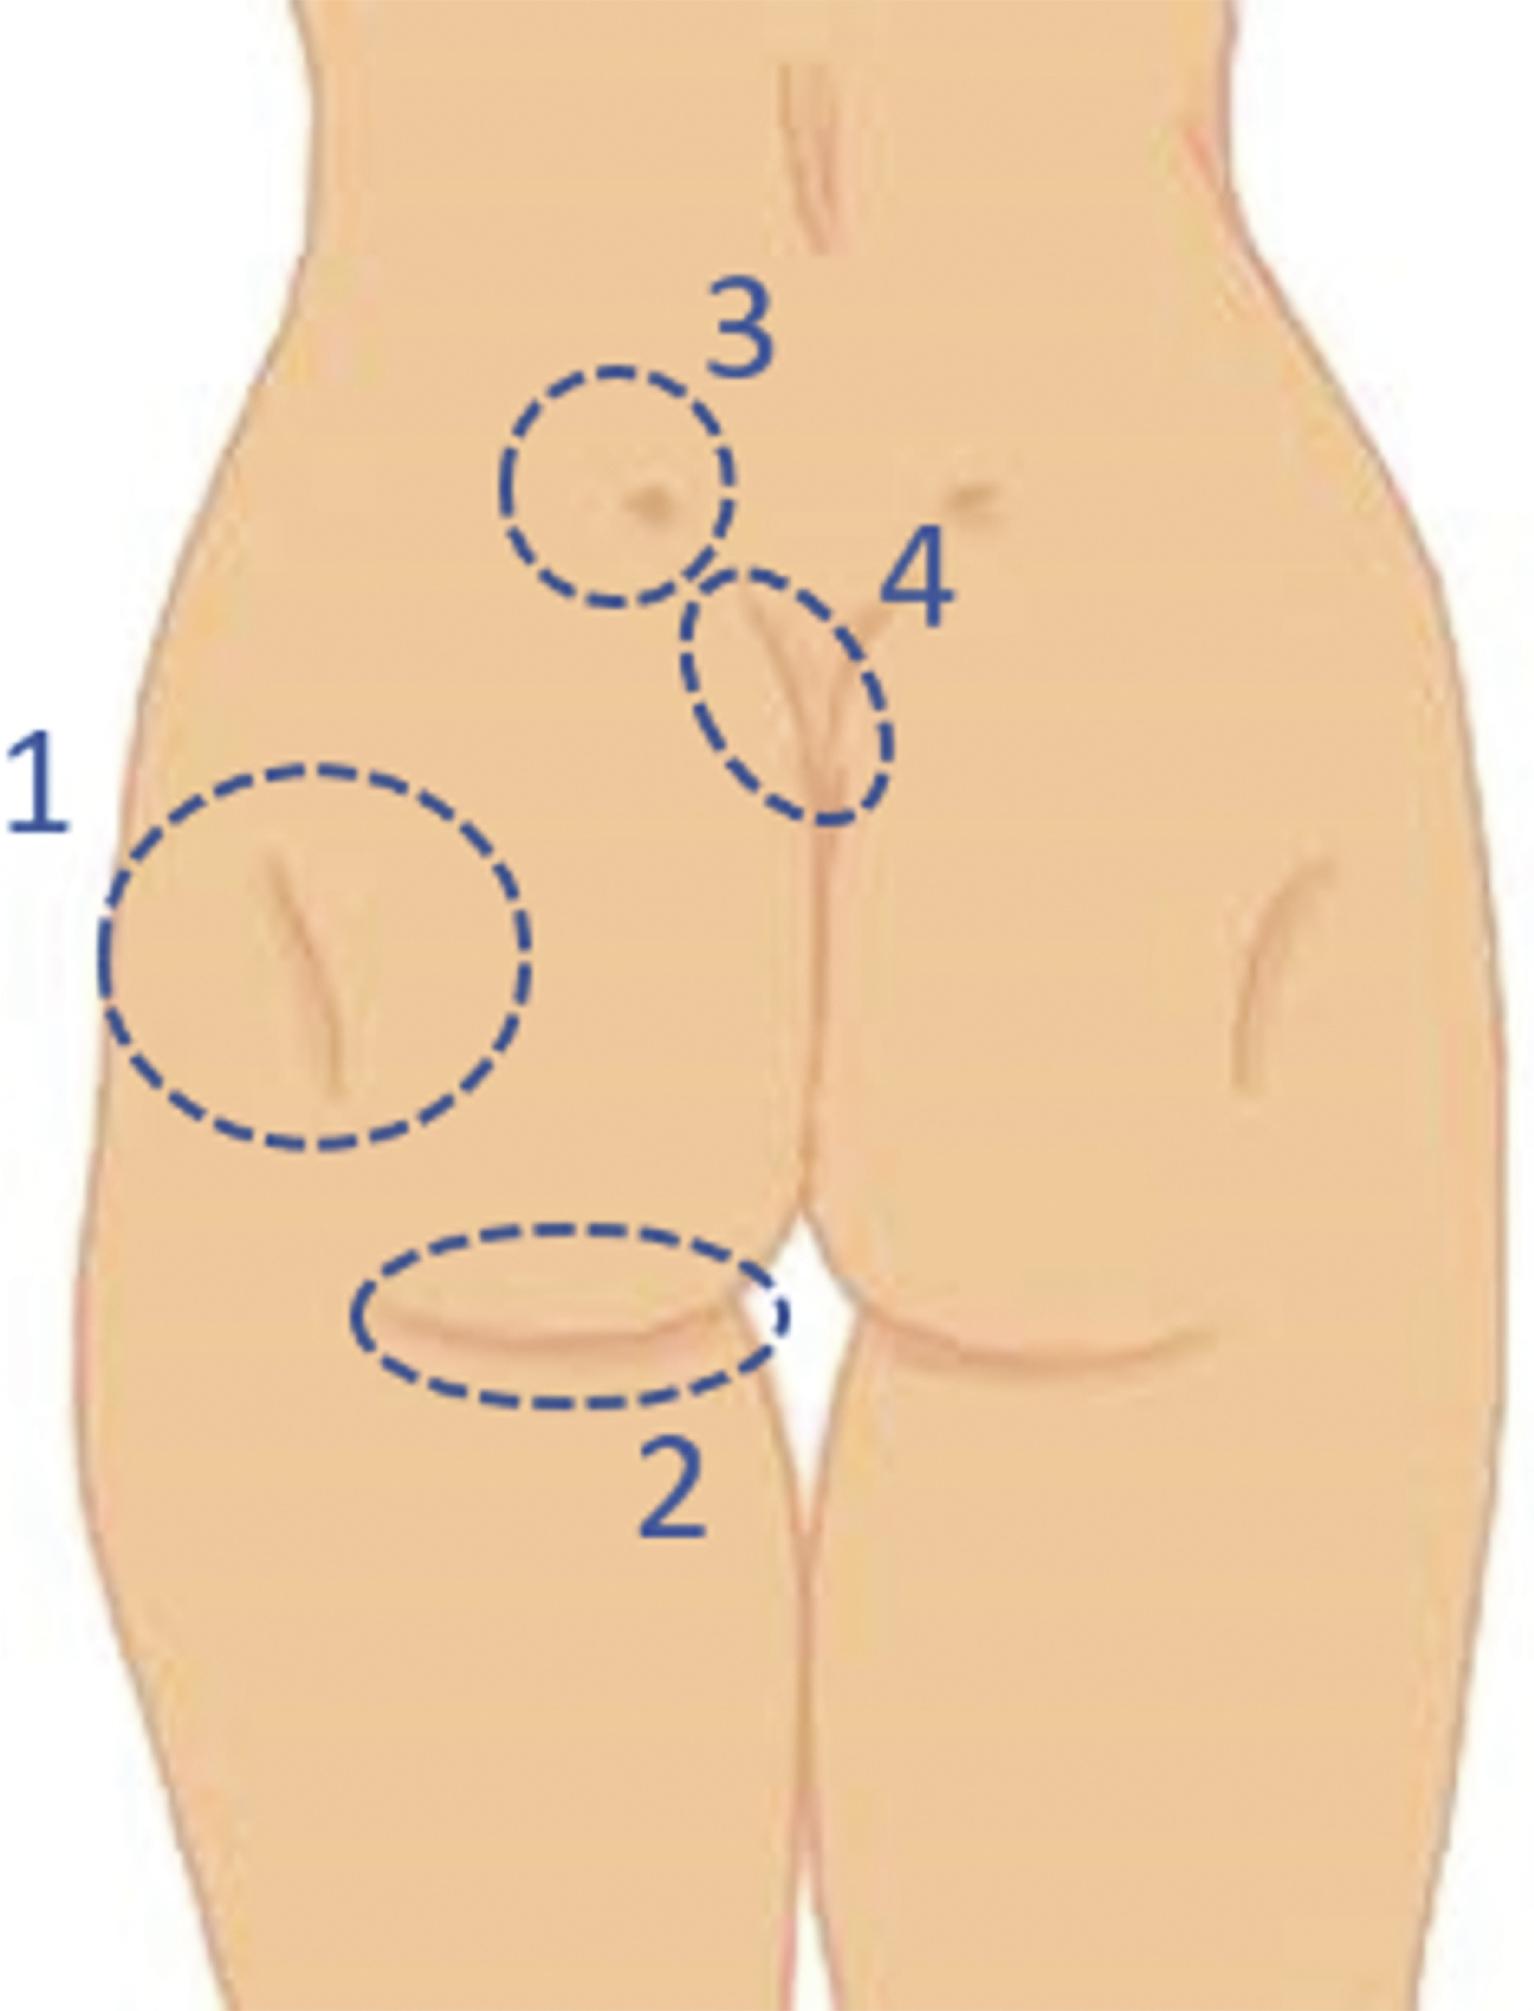 Fig. 29.1, Gluteal aesthetic references: 1 , Lateral depressions; 2 , infragluteal fold; 3 , supragluteal fossettes ; 4 , V-shaped fold.